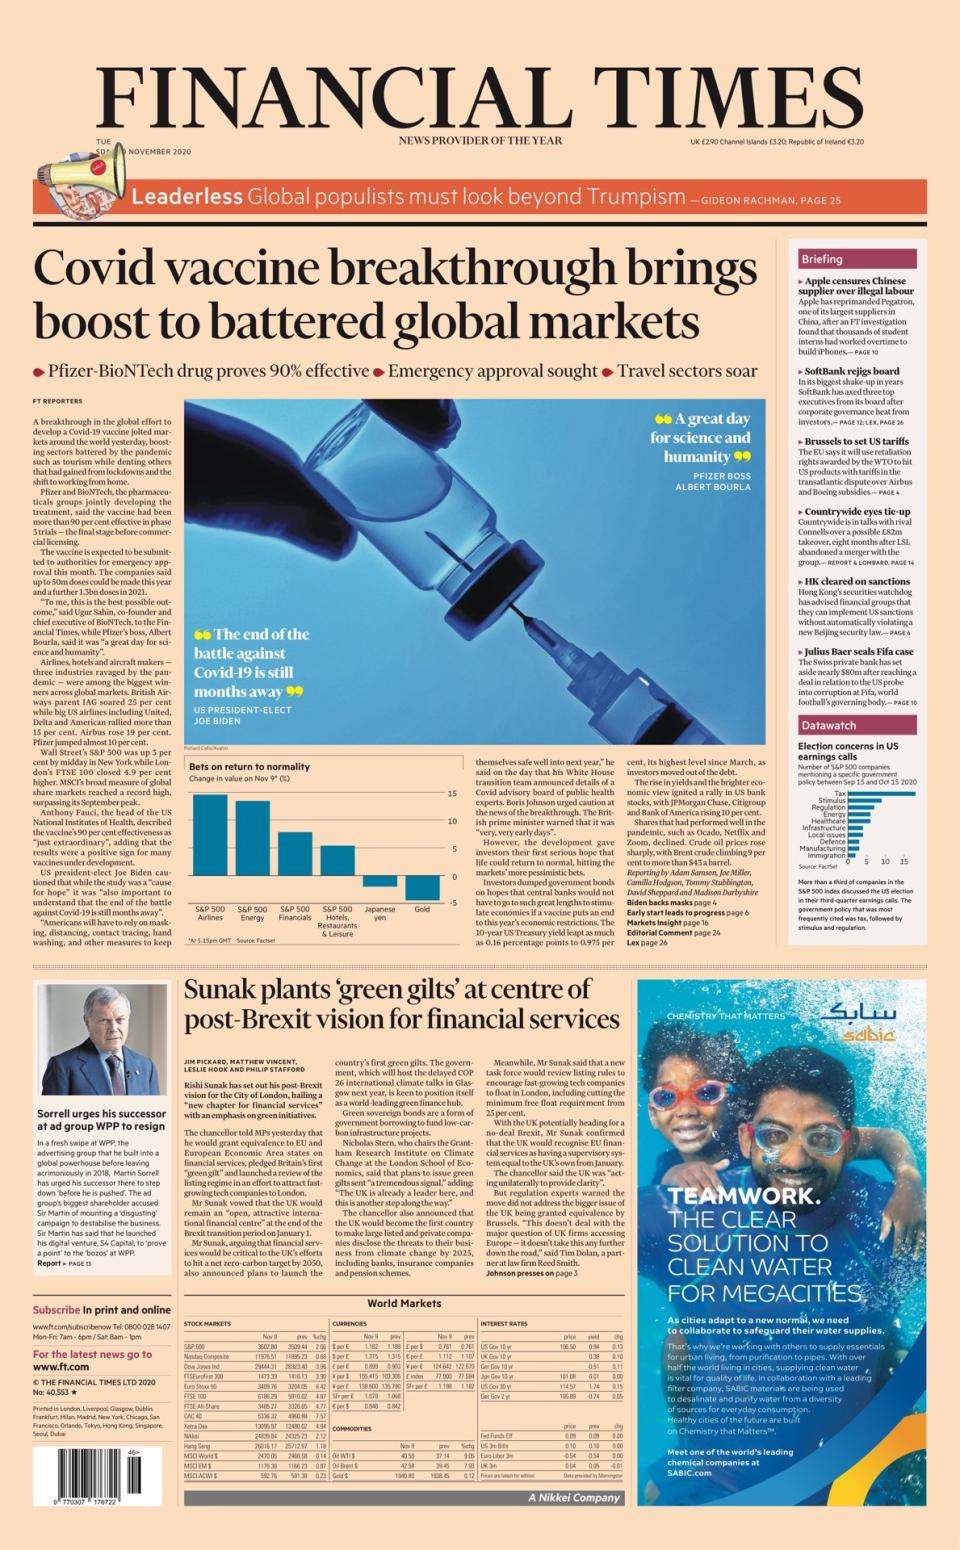 The Financial Times reported how the vaccine news boosted global markets.